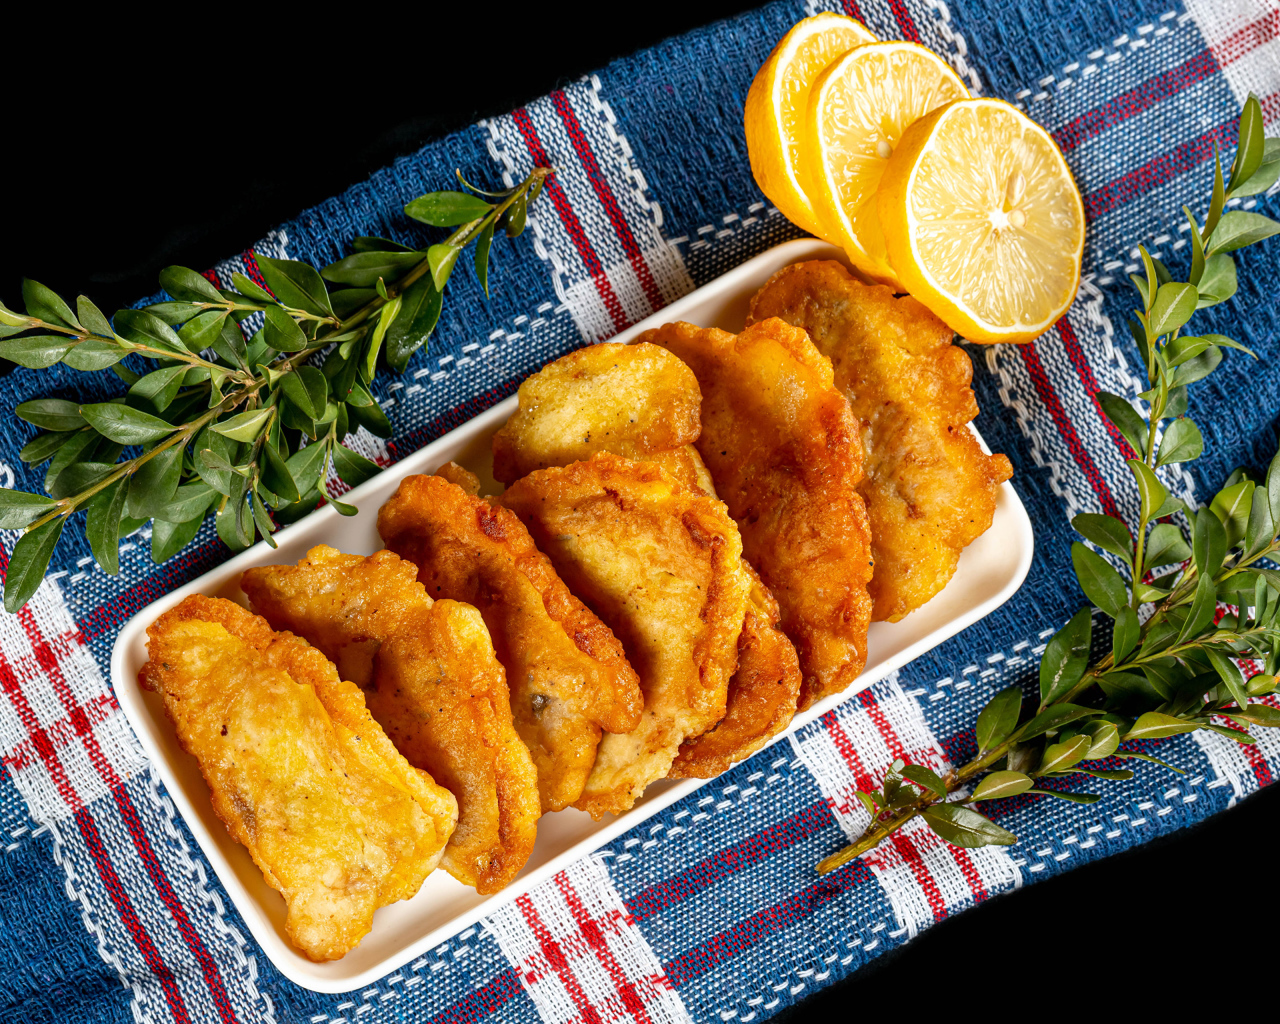 Fried fish in batter on a table with lemon and herbs